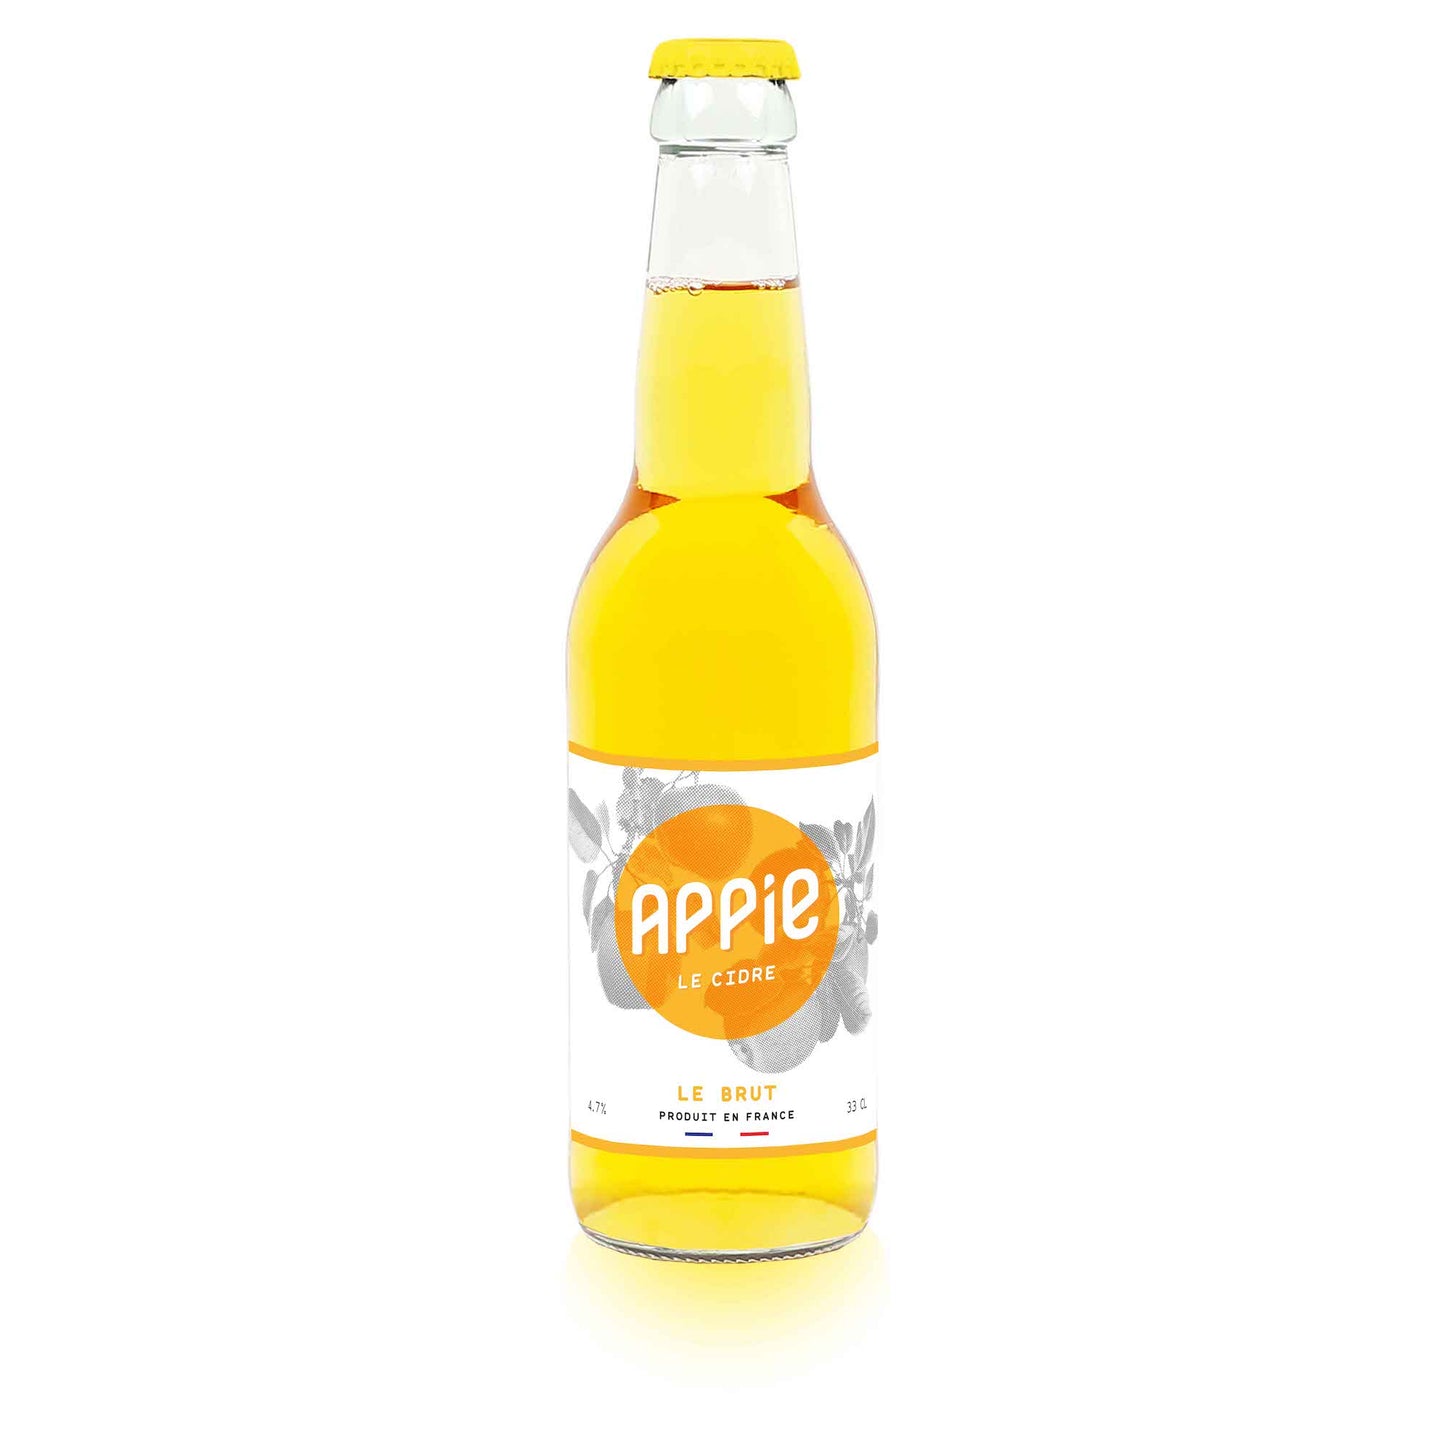 Le Brut - Appie GIFT